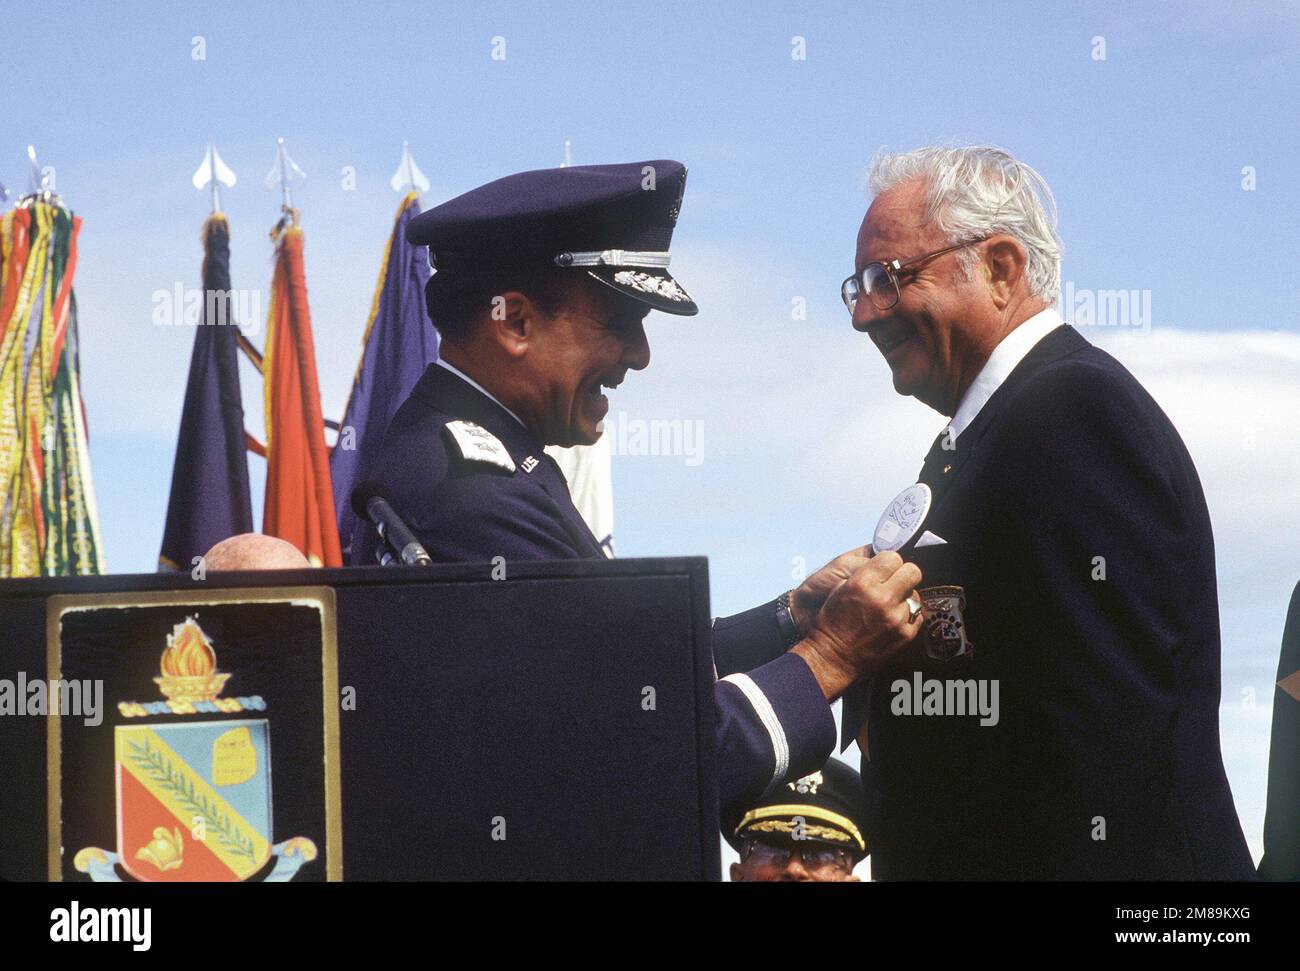 David M. Jones, one of Doolittle's Raiders, receives his POW/MIA medal for service in World War II from Major General Alexander K. Davidson, commander, 22nd Air Force, Military Airlift Command. Base: Nav Post Grad School, Monterey State: California (CA) Country: United States Of America (USA) Stock Photo